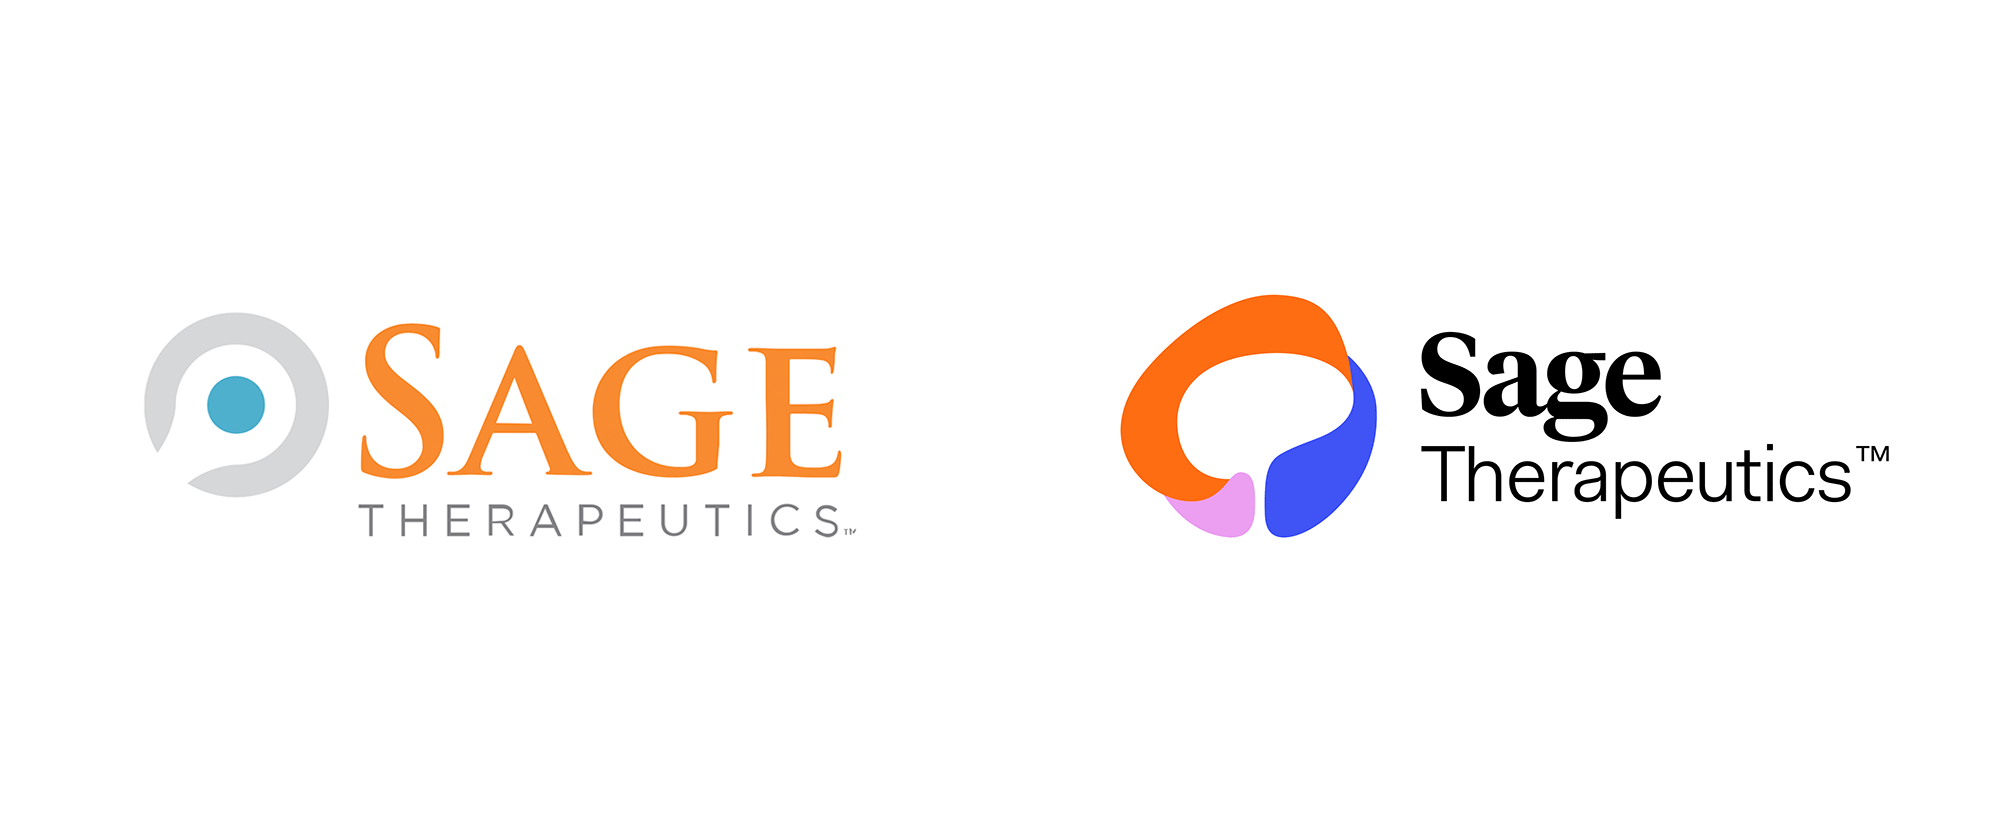 New Logo and Identity for Sage Therapeutics by Wolff Olins